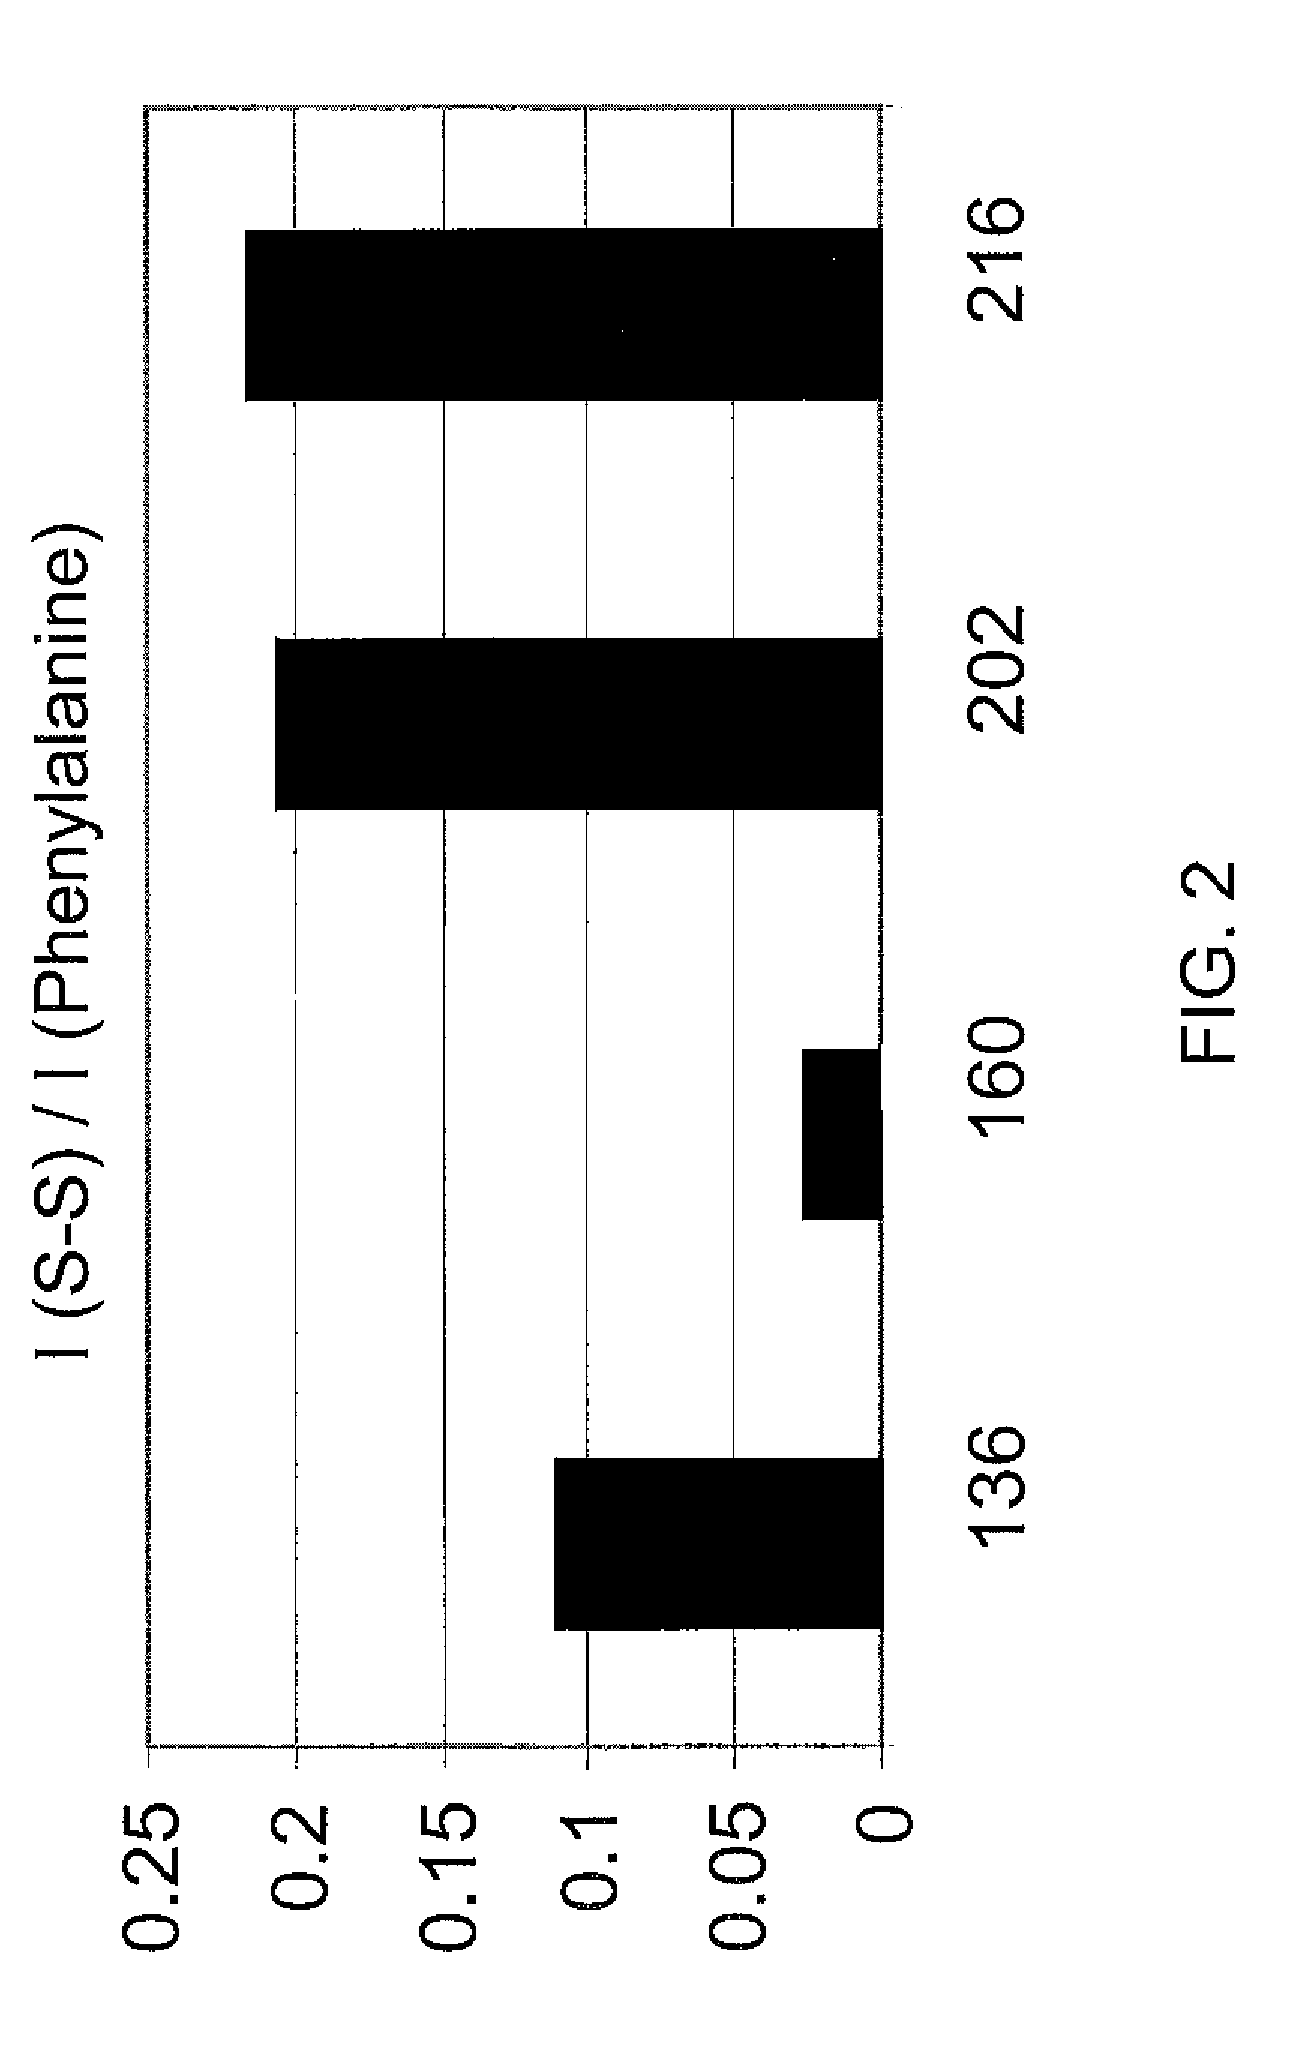 Method and apparatus for determination of bone fracture risk using raman spectroscopy